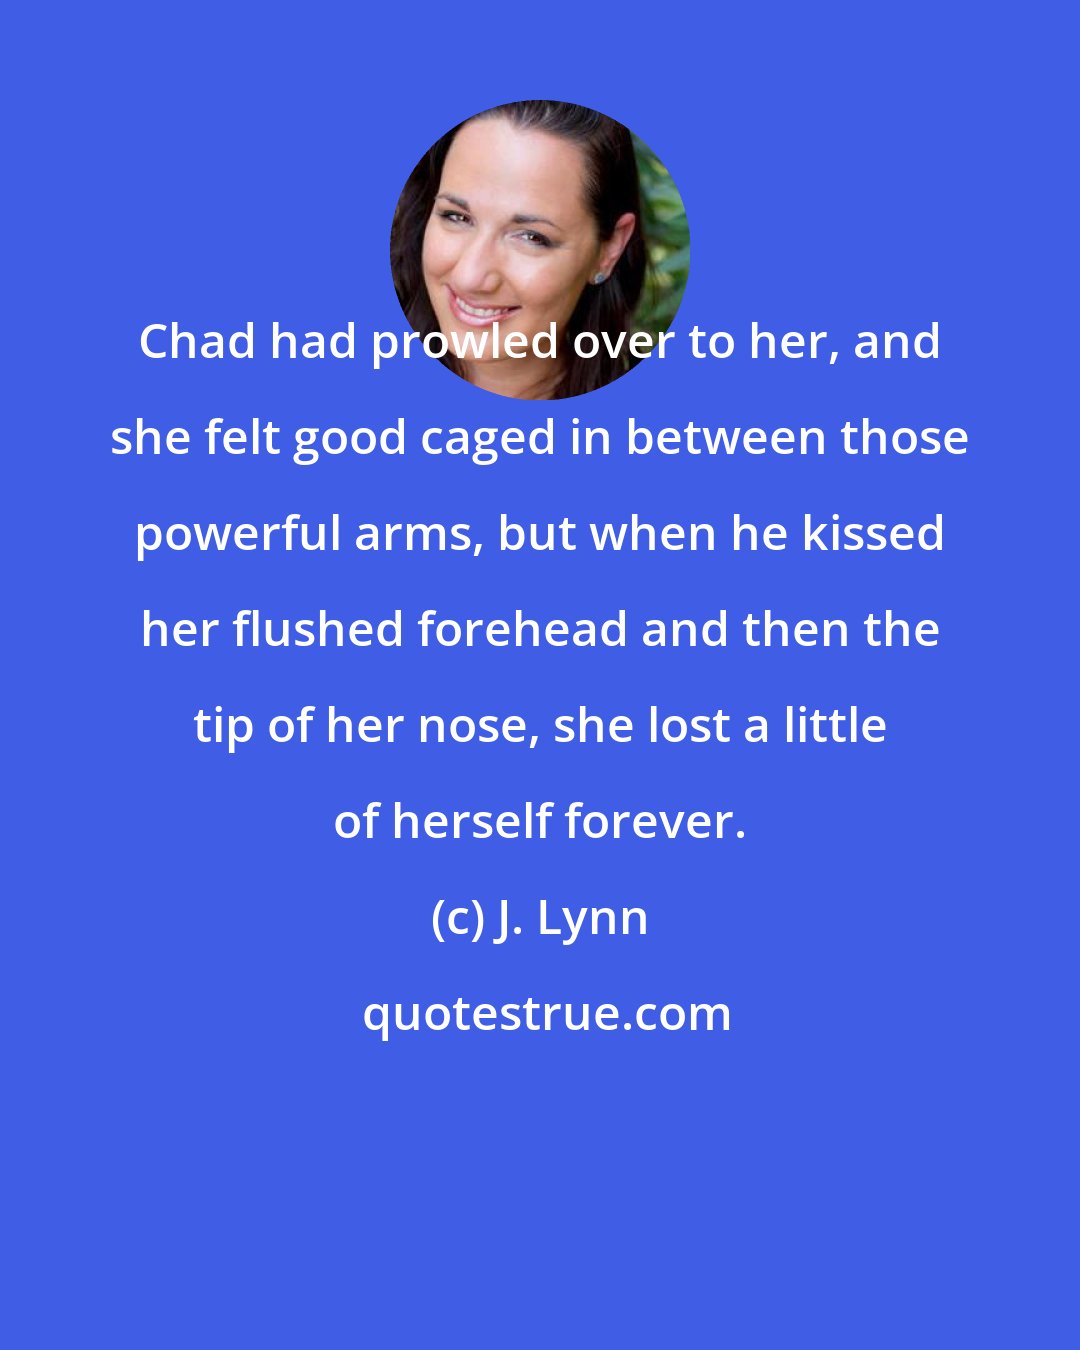 J. Lynn: Chad had prowled over to her, and she felt good caged in between those powerful arms, but when he kissed her flushed forehead and then the tip of her nose, she lost a little of herself forever.